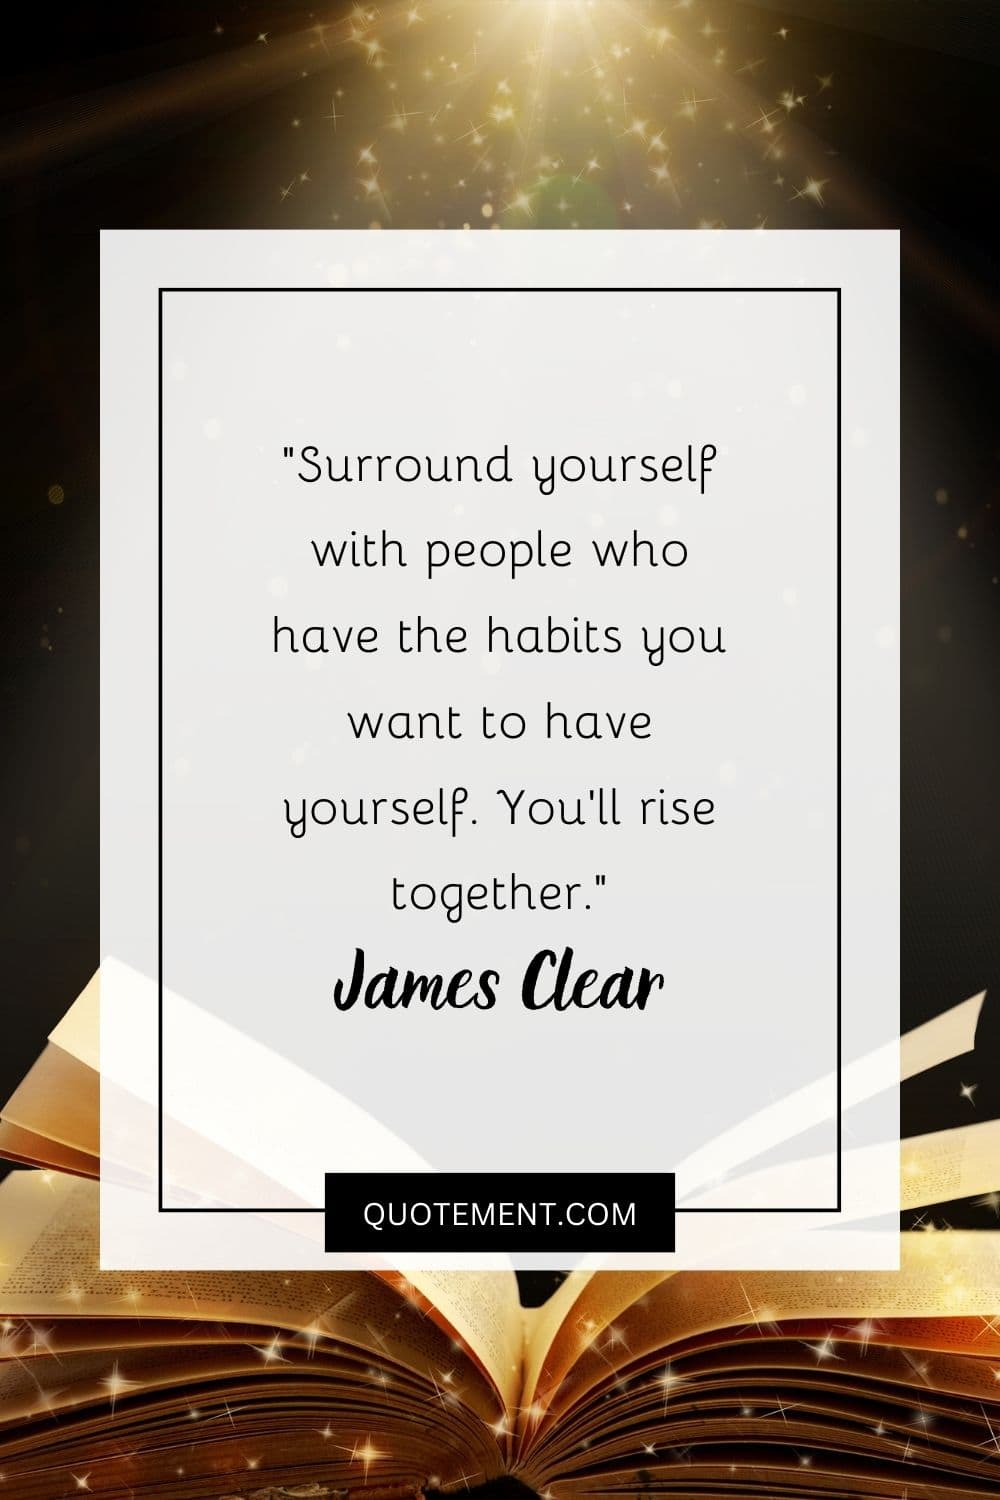 Surround yourself with people who have the habits you want to have yourself